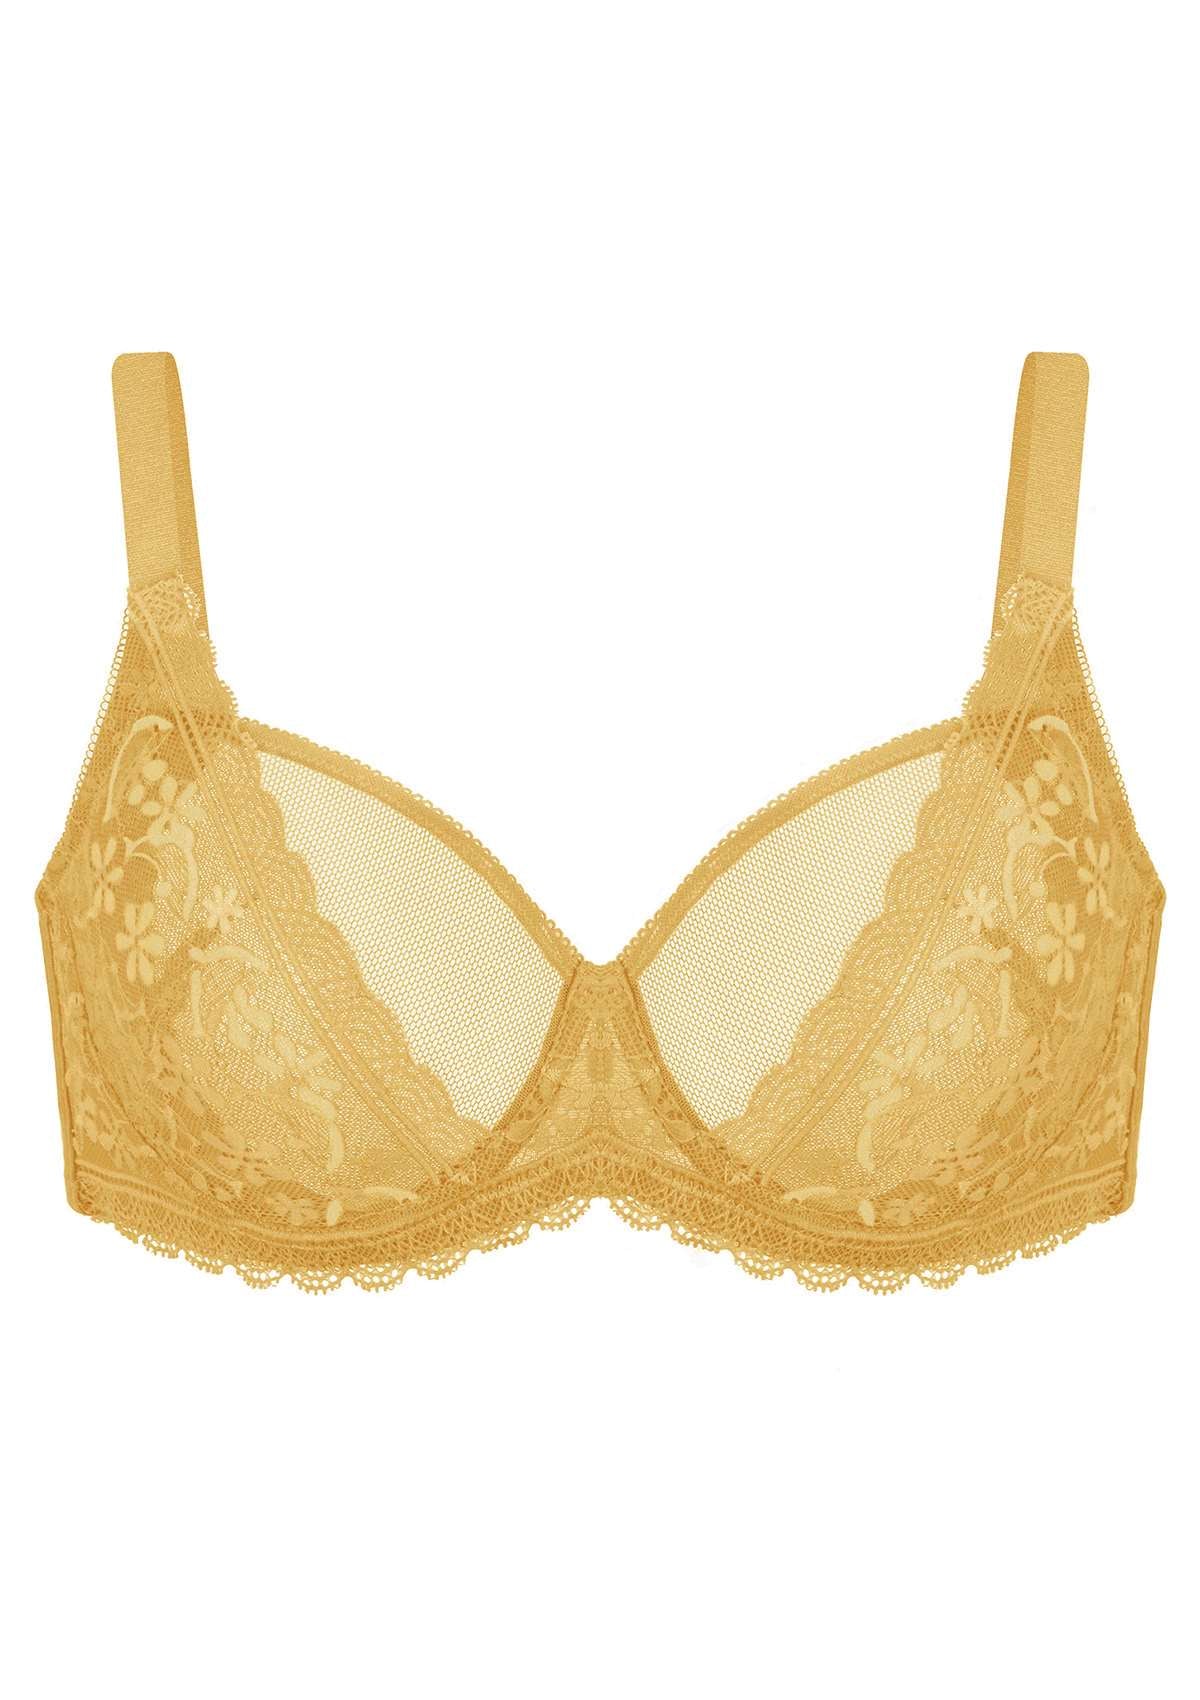 HSIA Anemone Lace Unlined Bra: Supportive, Lightweight Bra - Ginger / 36 / D